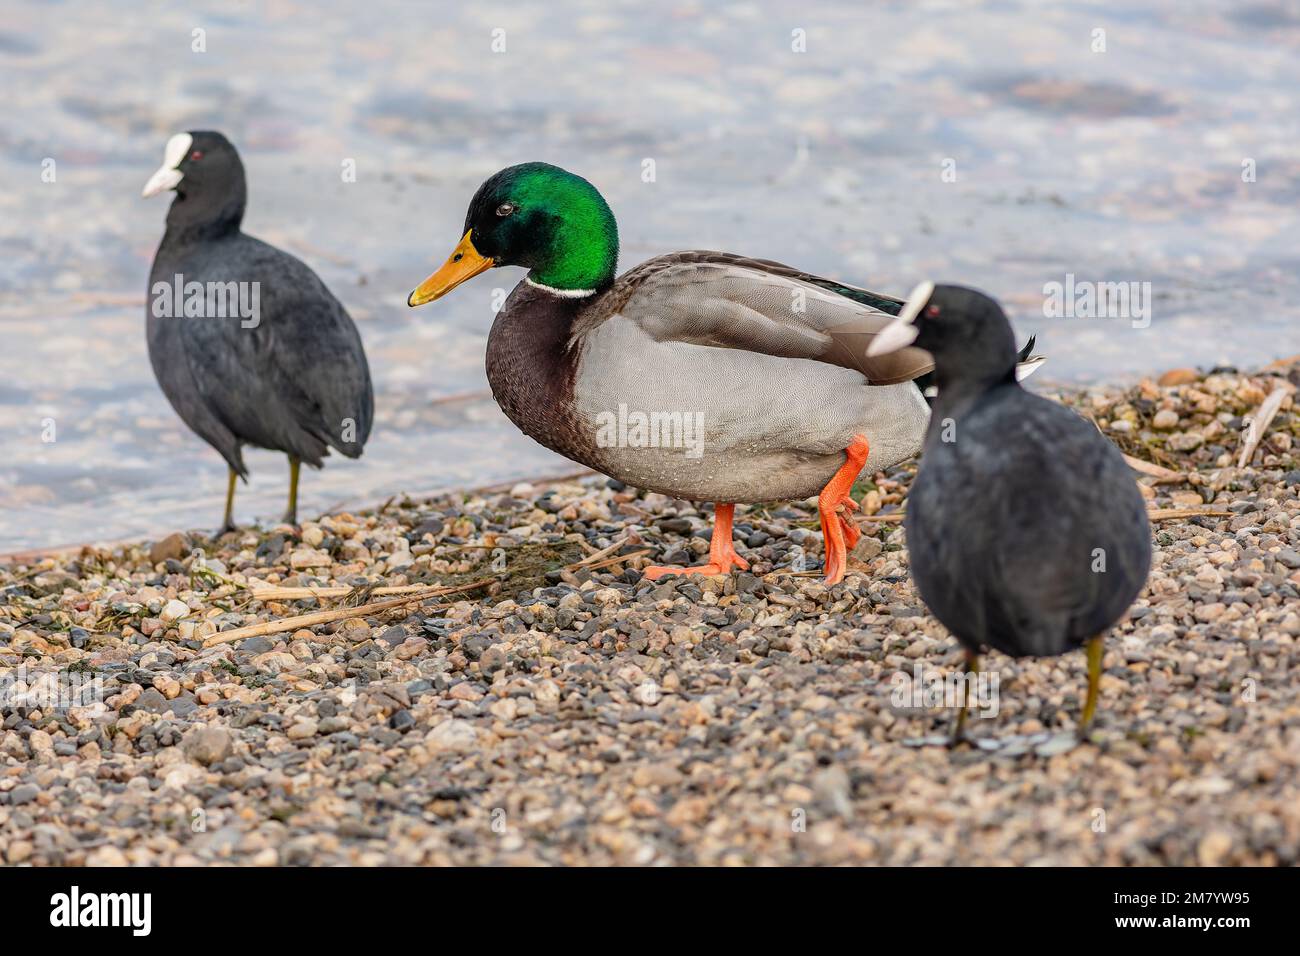 A male mallard duck, a colorful water bird, standing on a lake beach with pebbles among two black Eurasian coots. Blue water in the background. Stock Photo